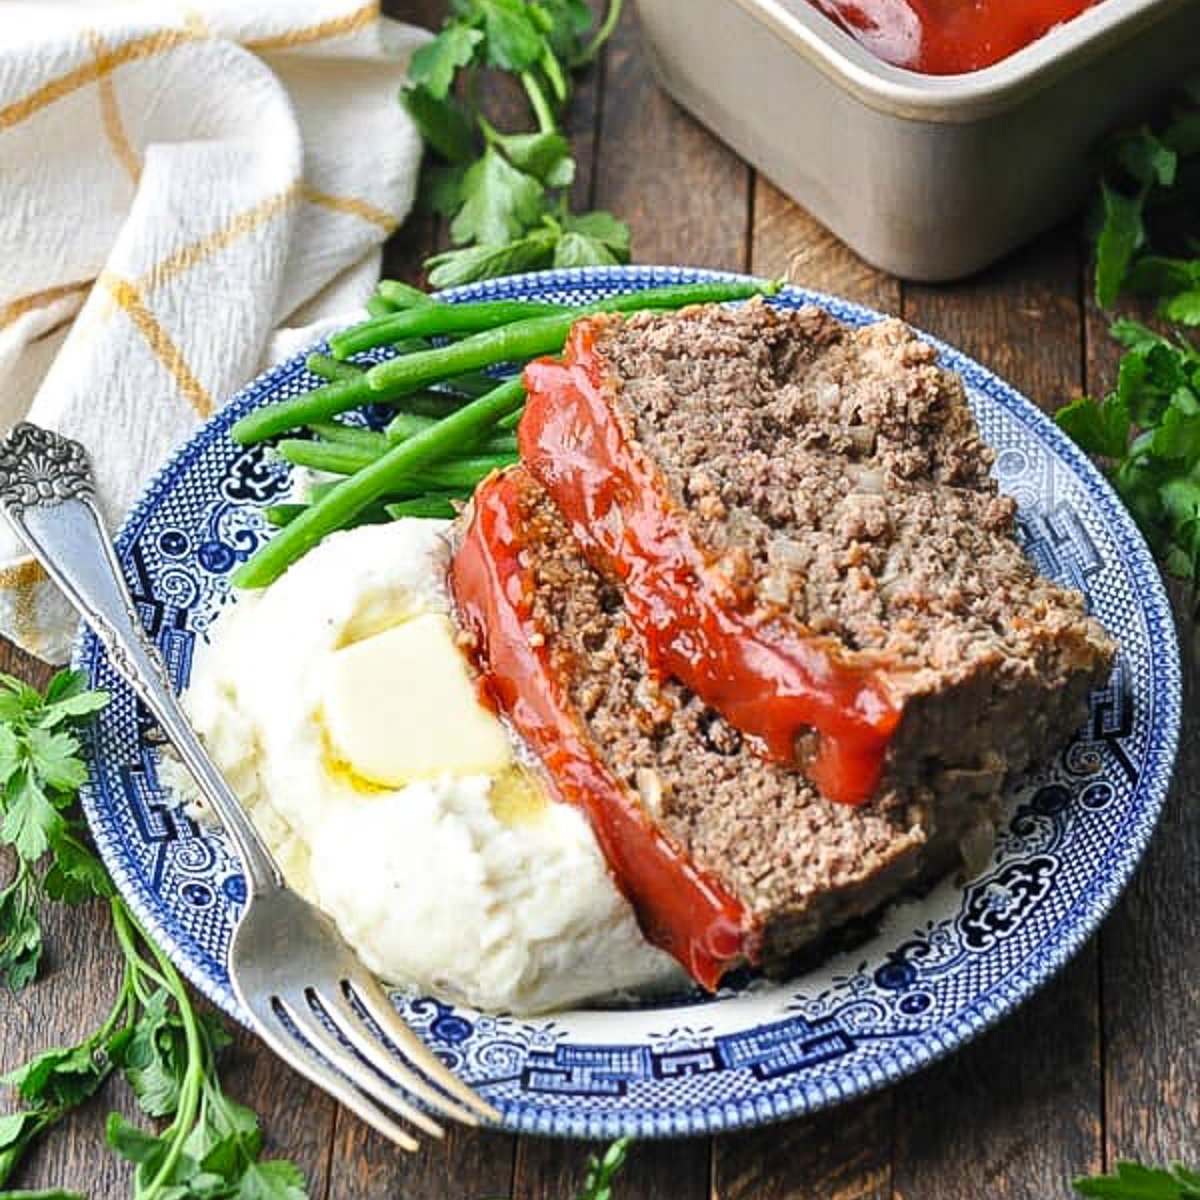 https://www.theseasonedmom.com/wp-content/uploads/2020/04/Meatloaf-with-Oatmeal-Square.jpg